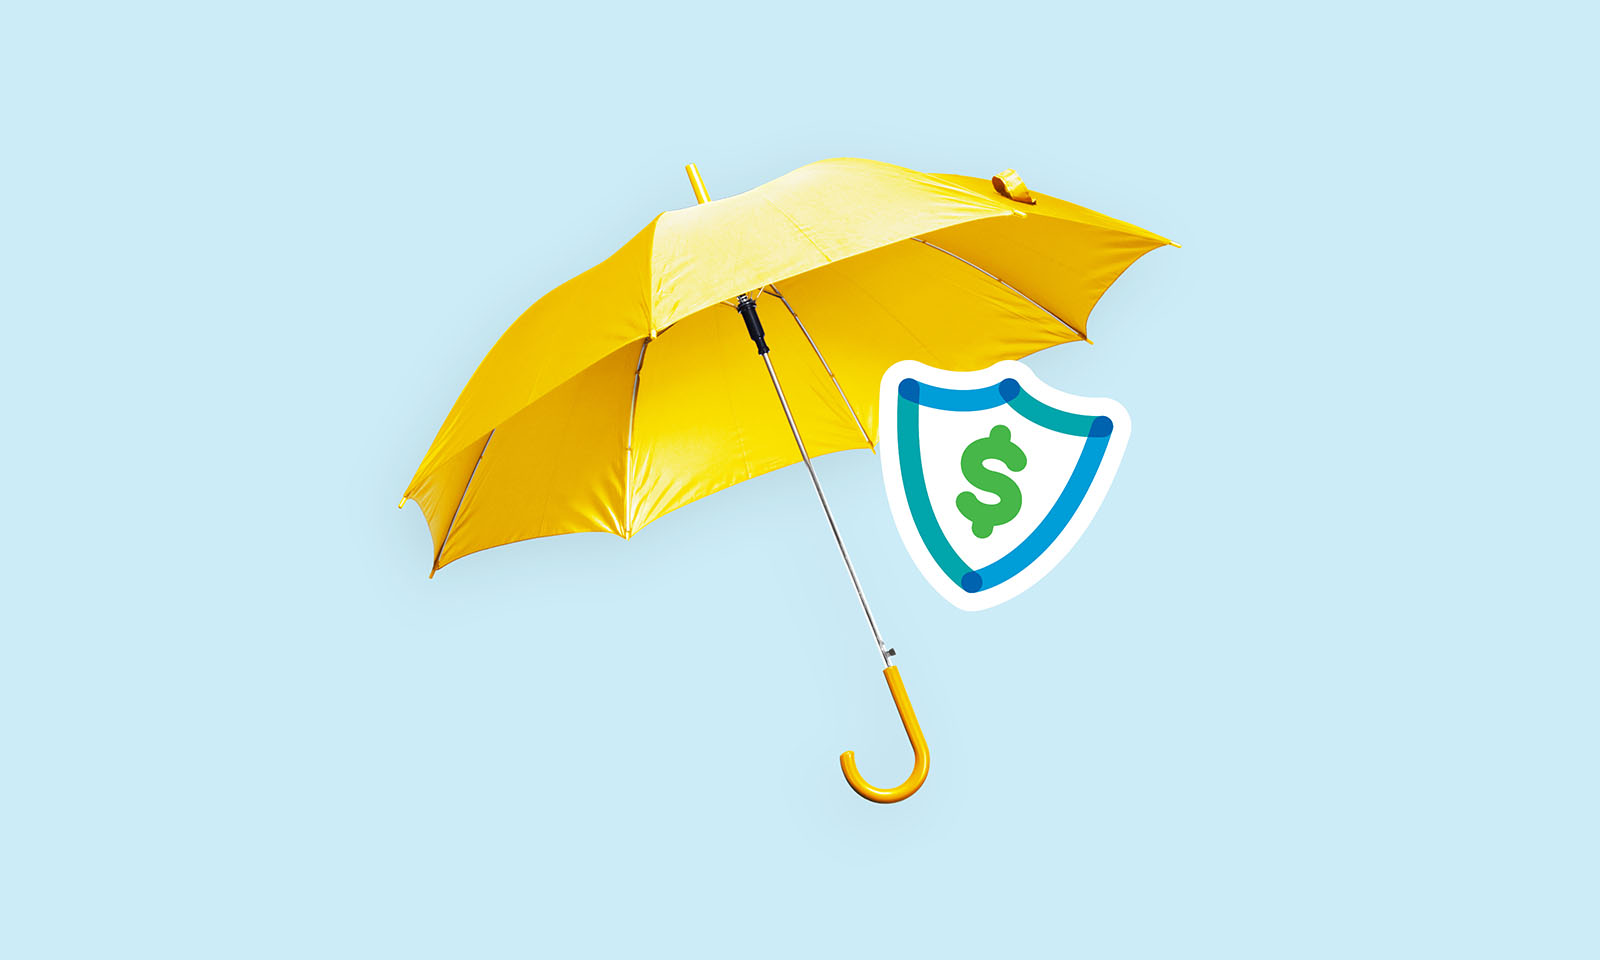 Yellow umbrella and a shield icon with a dollar symbol